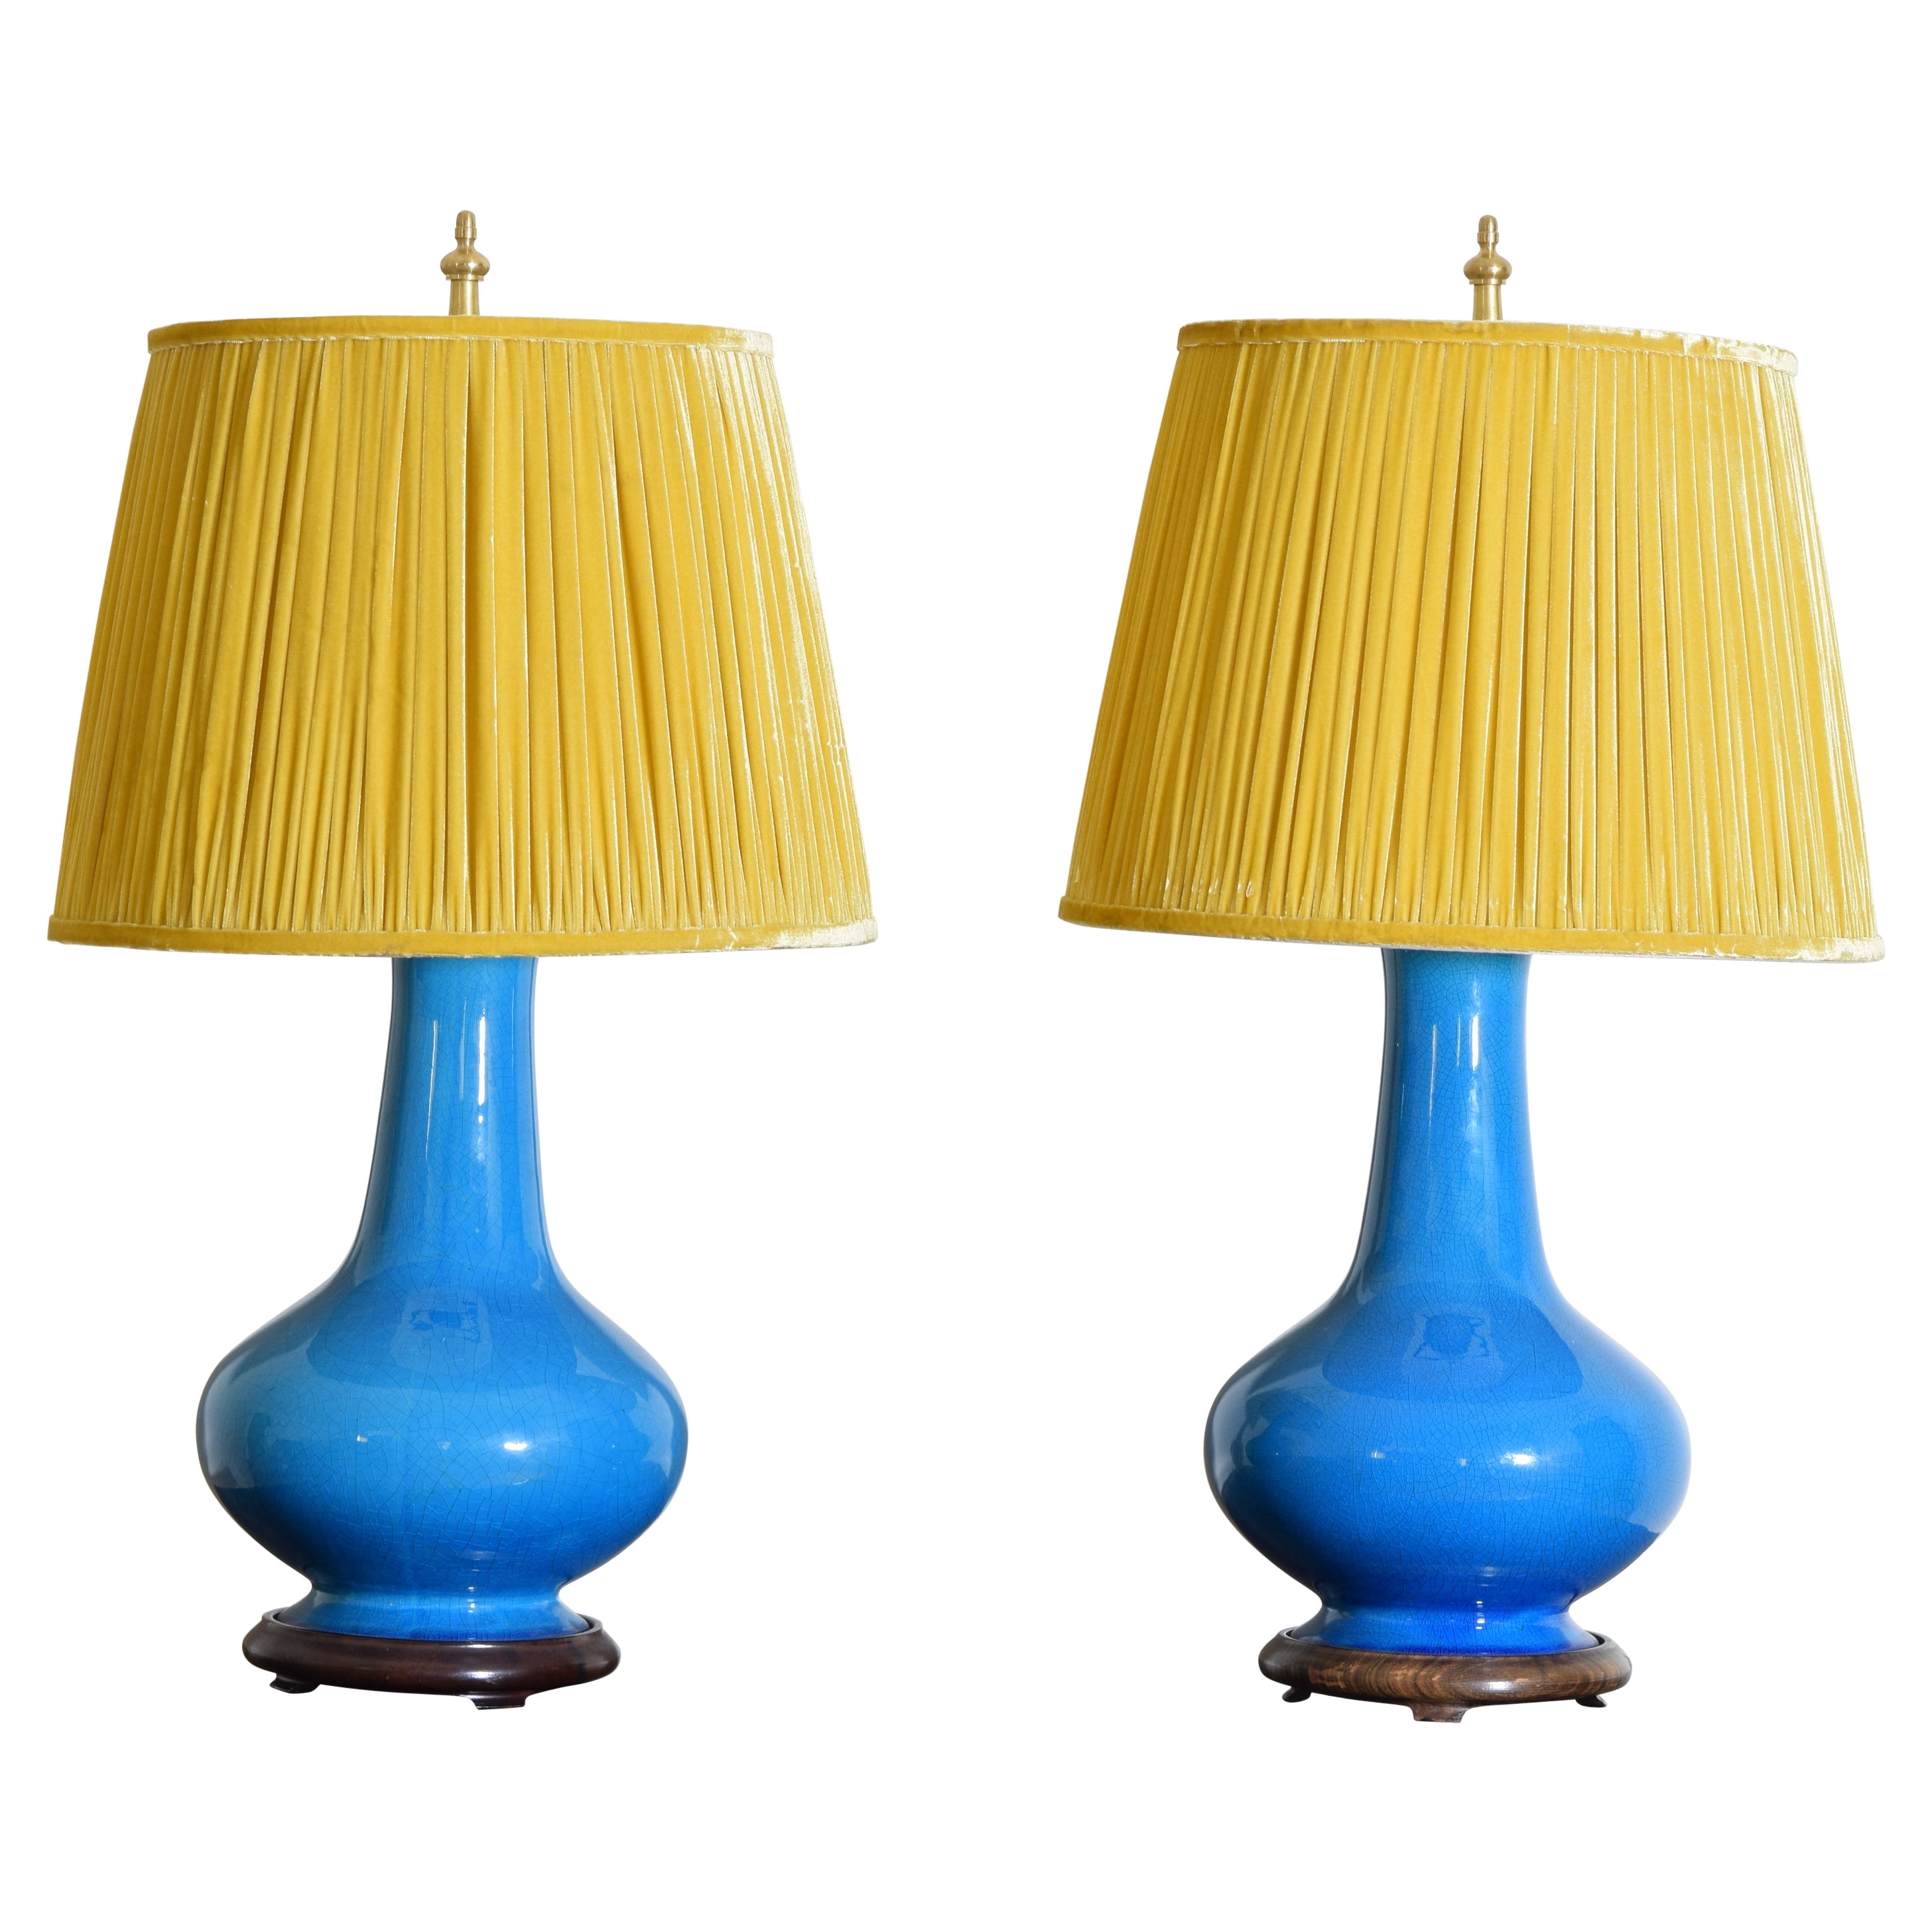 A Pair of Mid-20th Century Cerulean Blue Lamps with Custom Velvet Pleated Shades For Sale